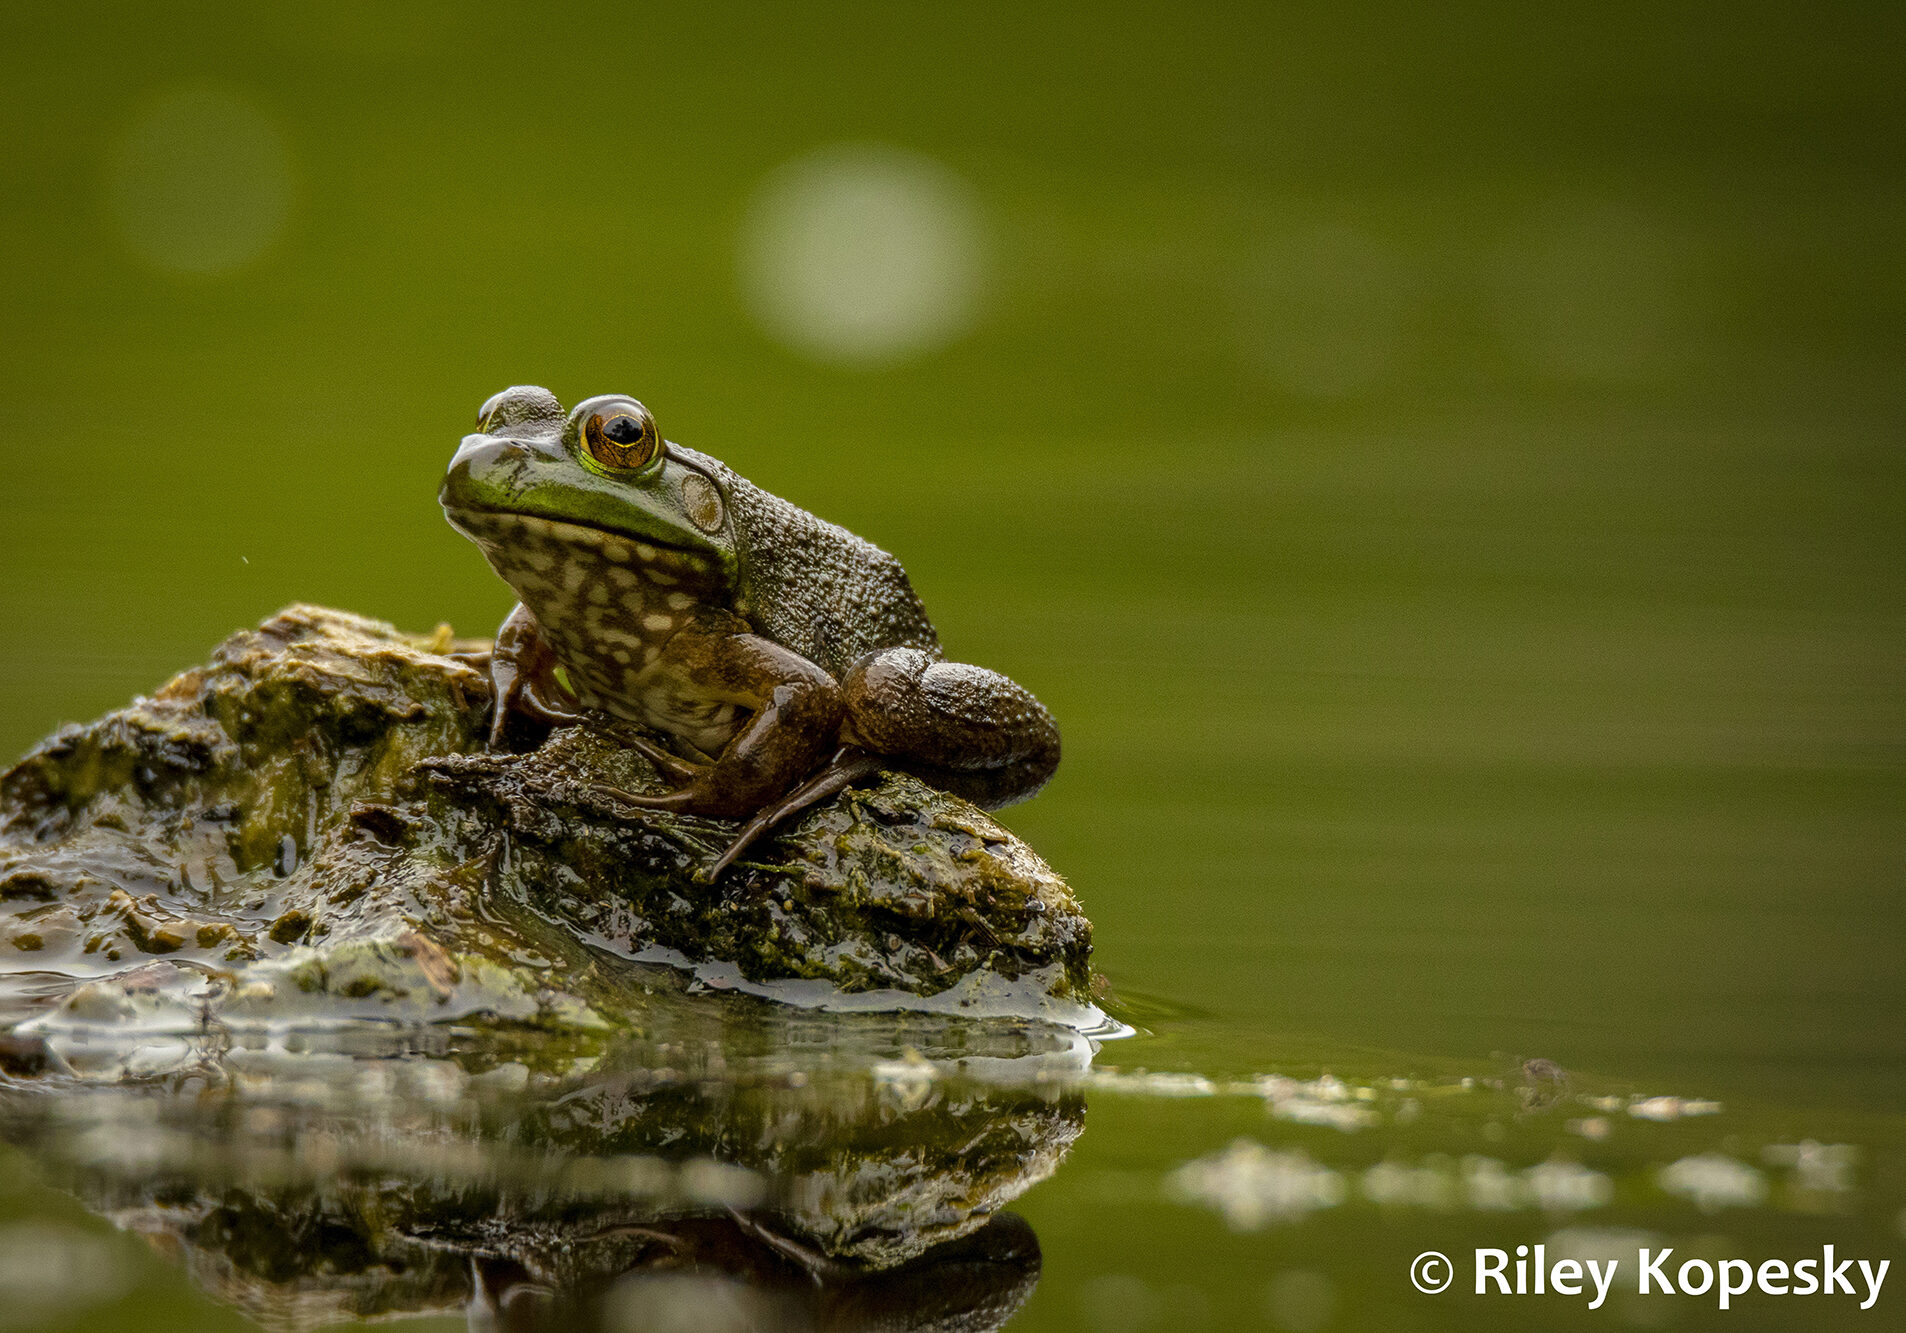 A frog sits on a rock poking out from the water